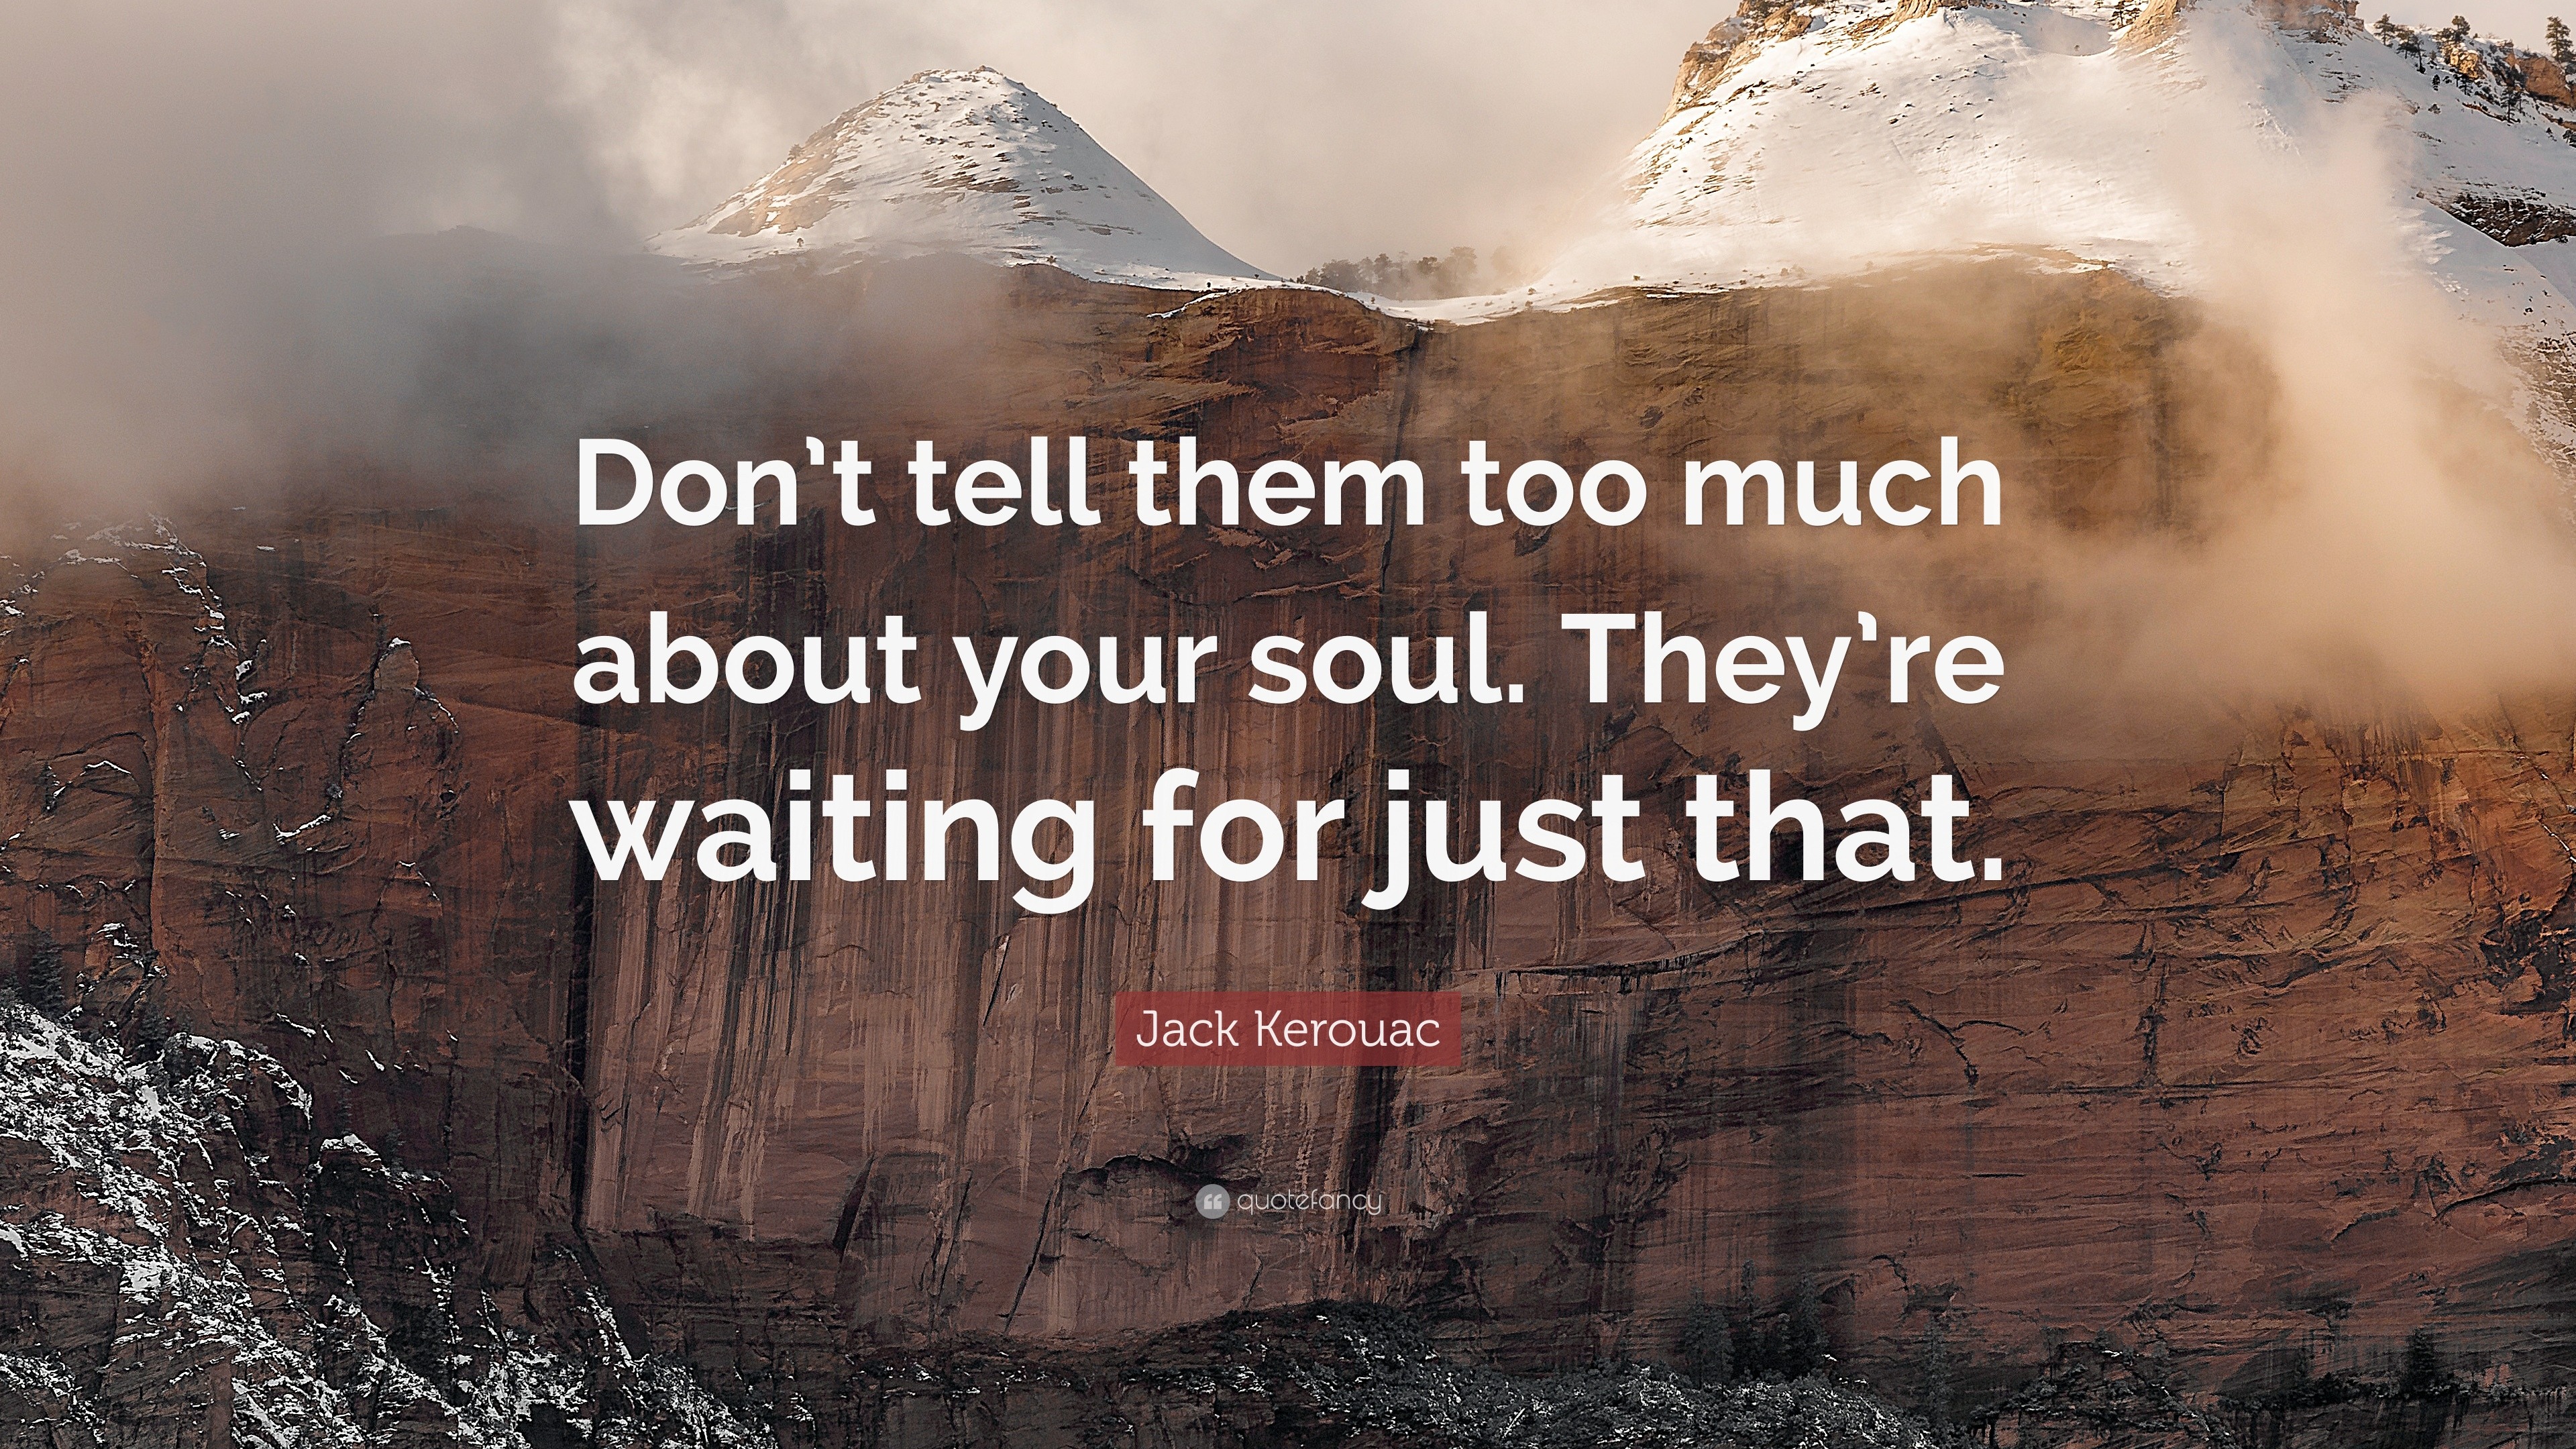 Jack Kerouac Quote “Don t tell them too much about your soul